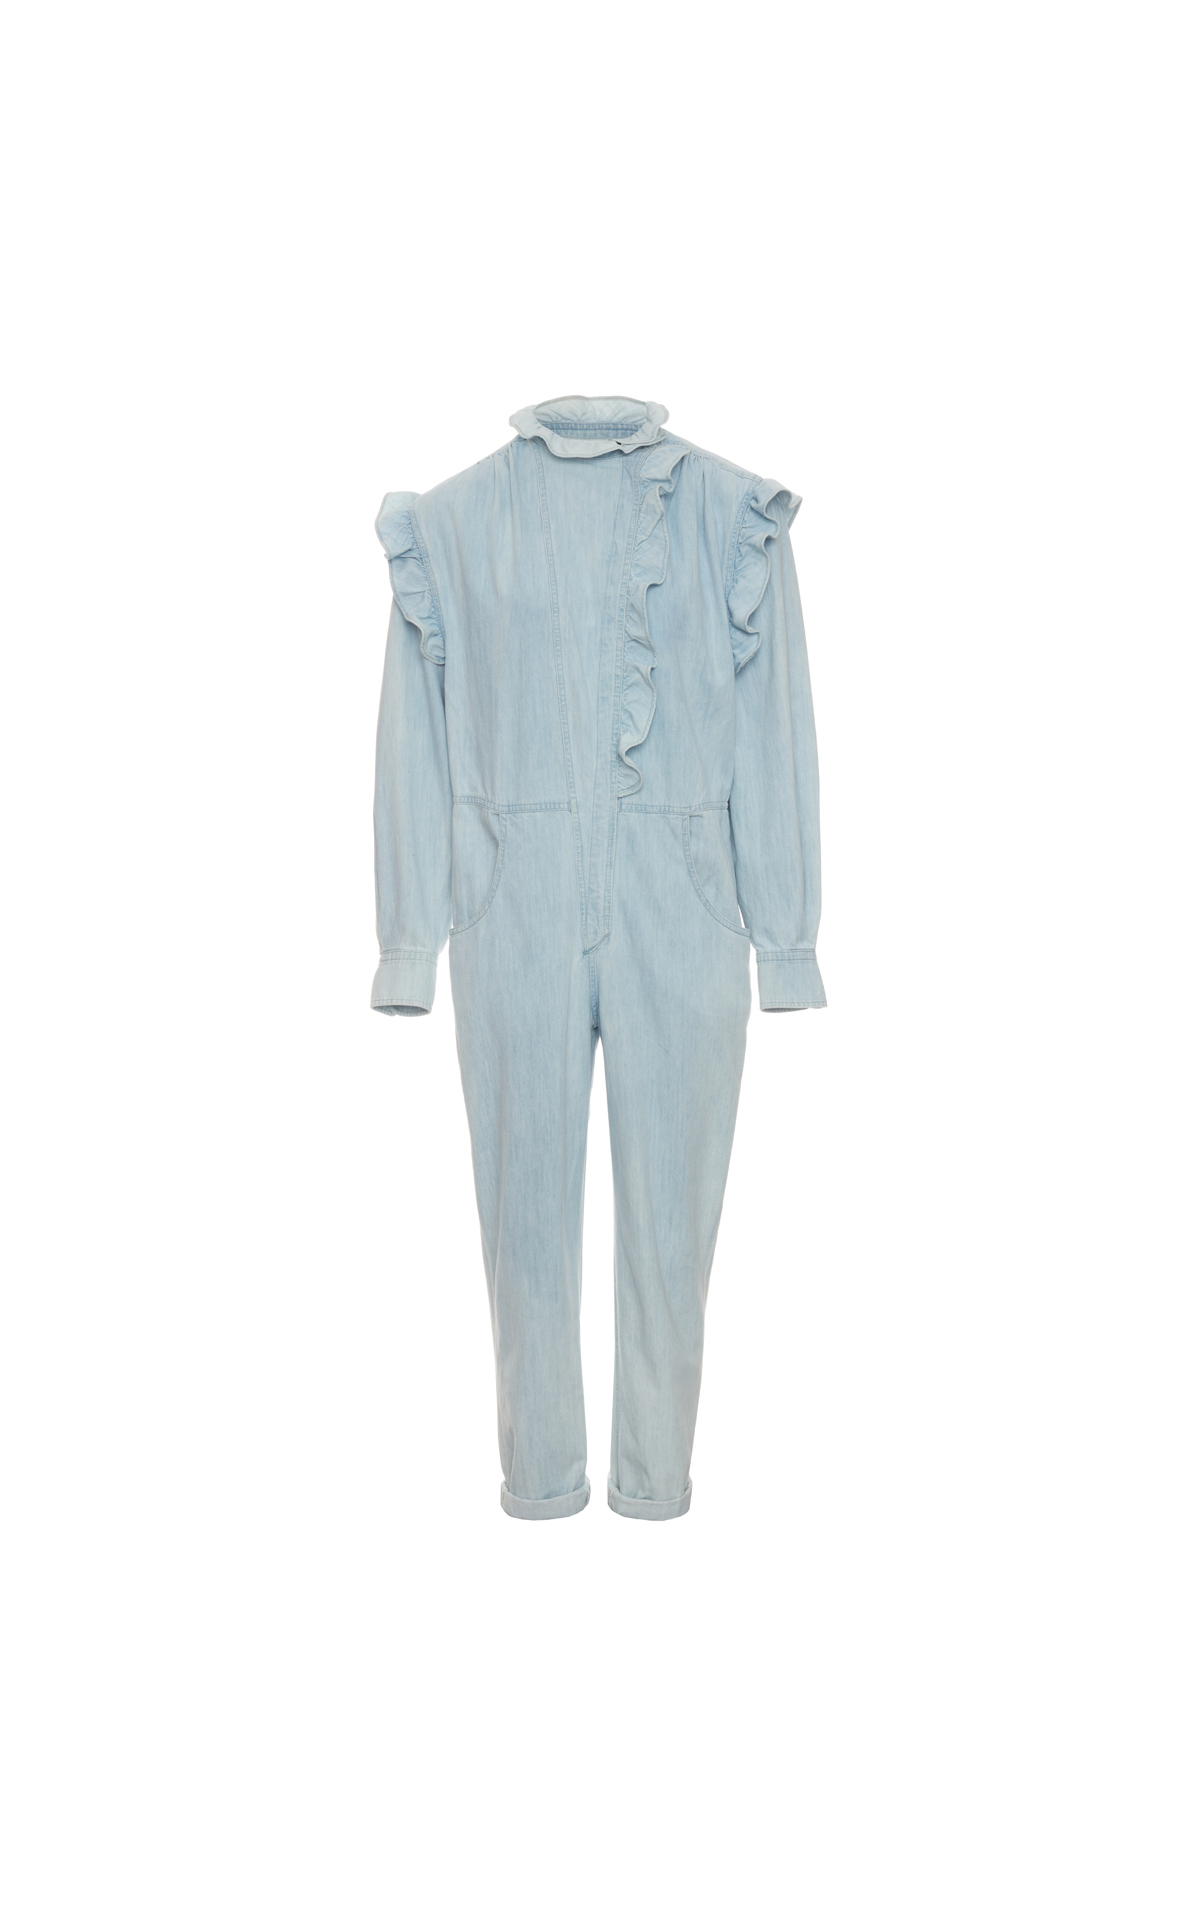 Isabel Marant Denim jumpsuit with ruffles from Bicester Village